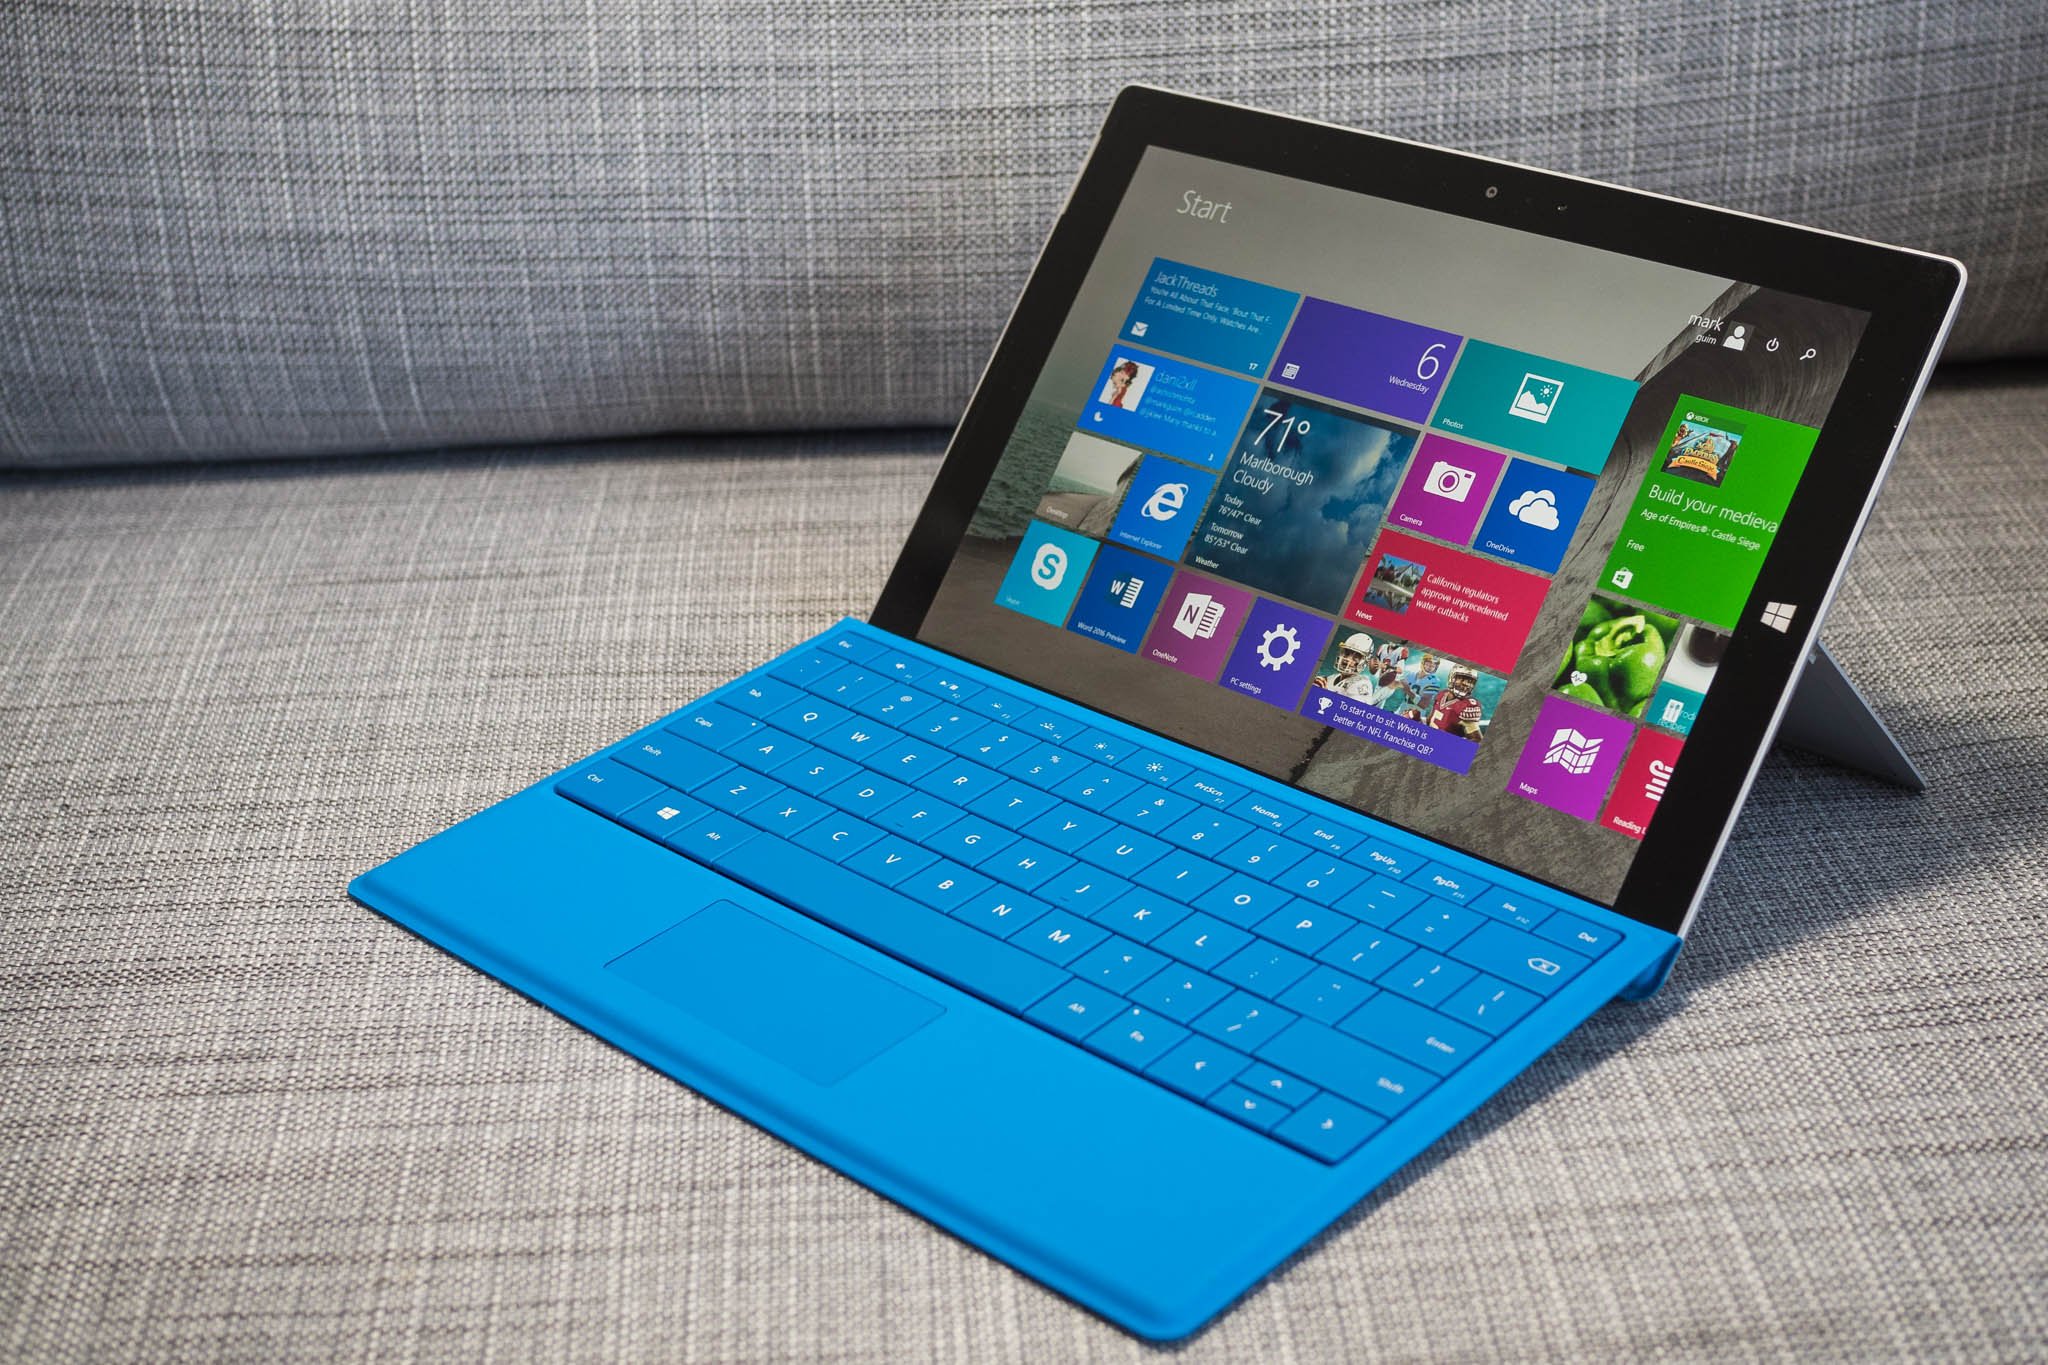 Surface 3 gets rare firmware update with security fixes in tow